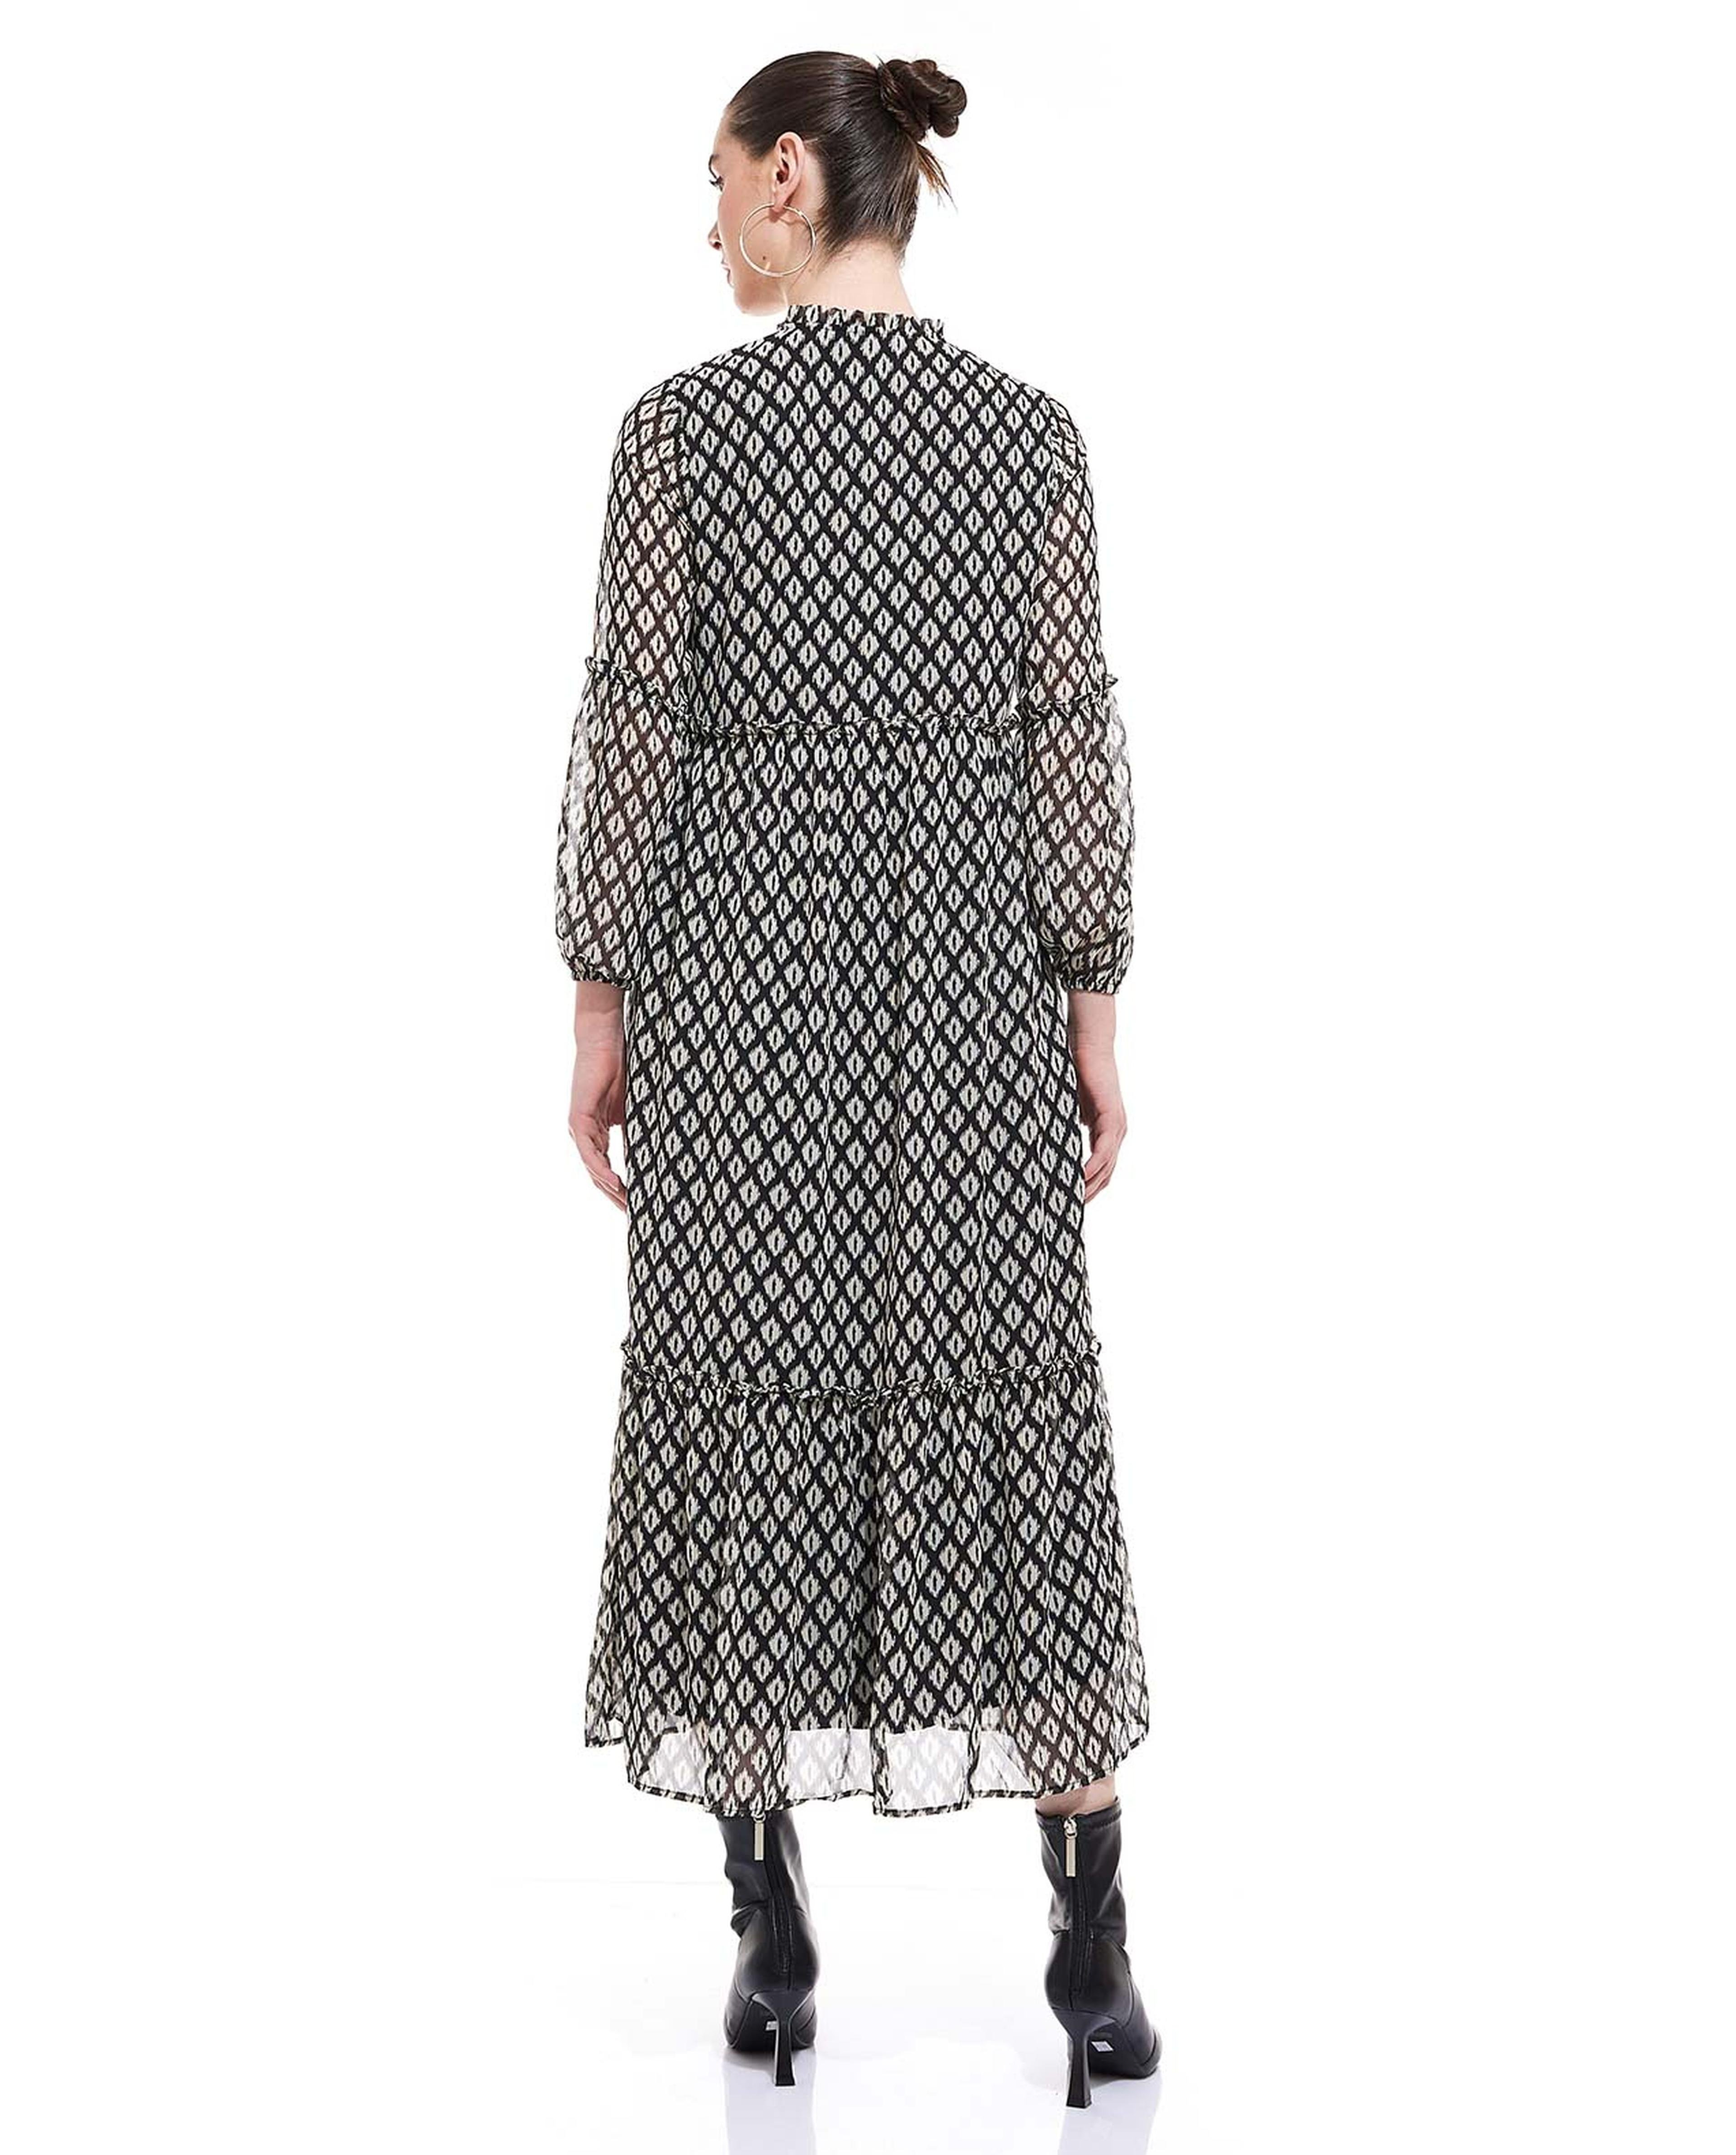 Patterned Midi Dress with Long Sleeves